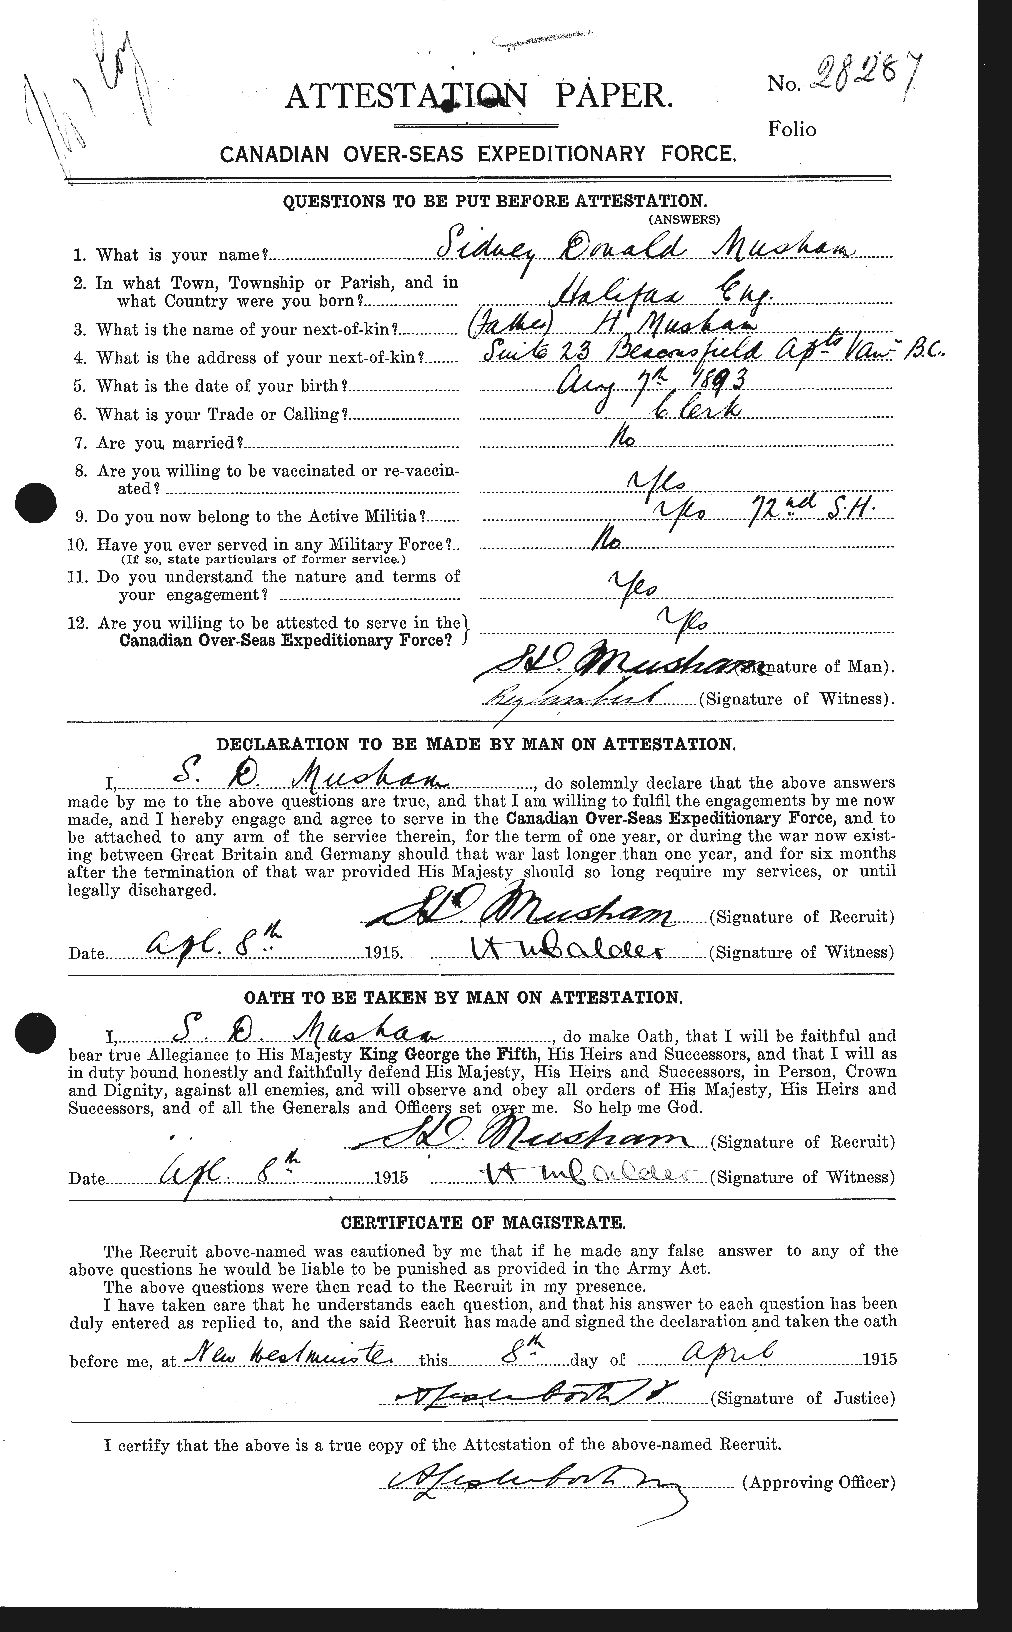 Personnel Records of the First World War - CEF 514977a